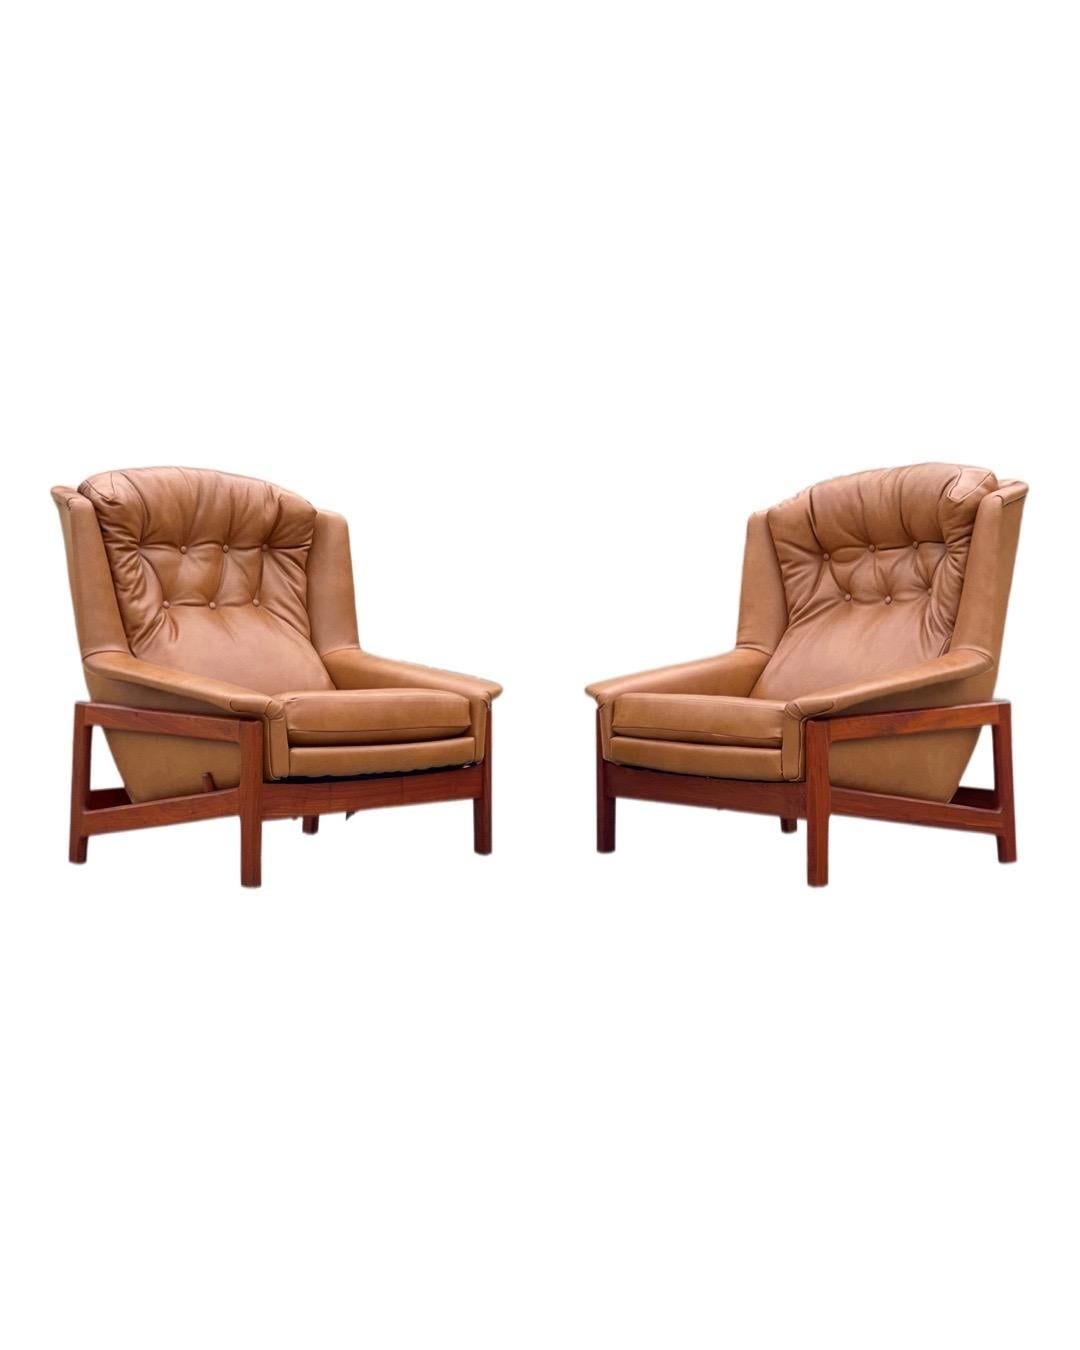 Midcentury Reclining Lounge Chairs in Leather + Walnut by Folke Ohlsson for DUX For Sale 9